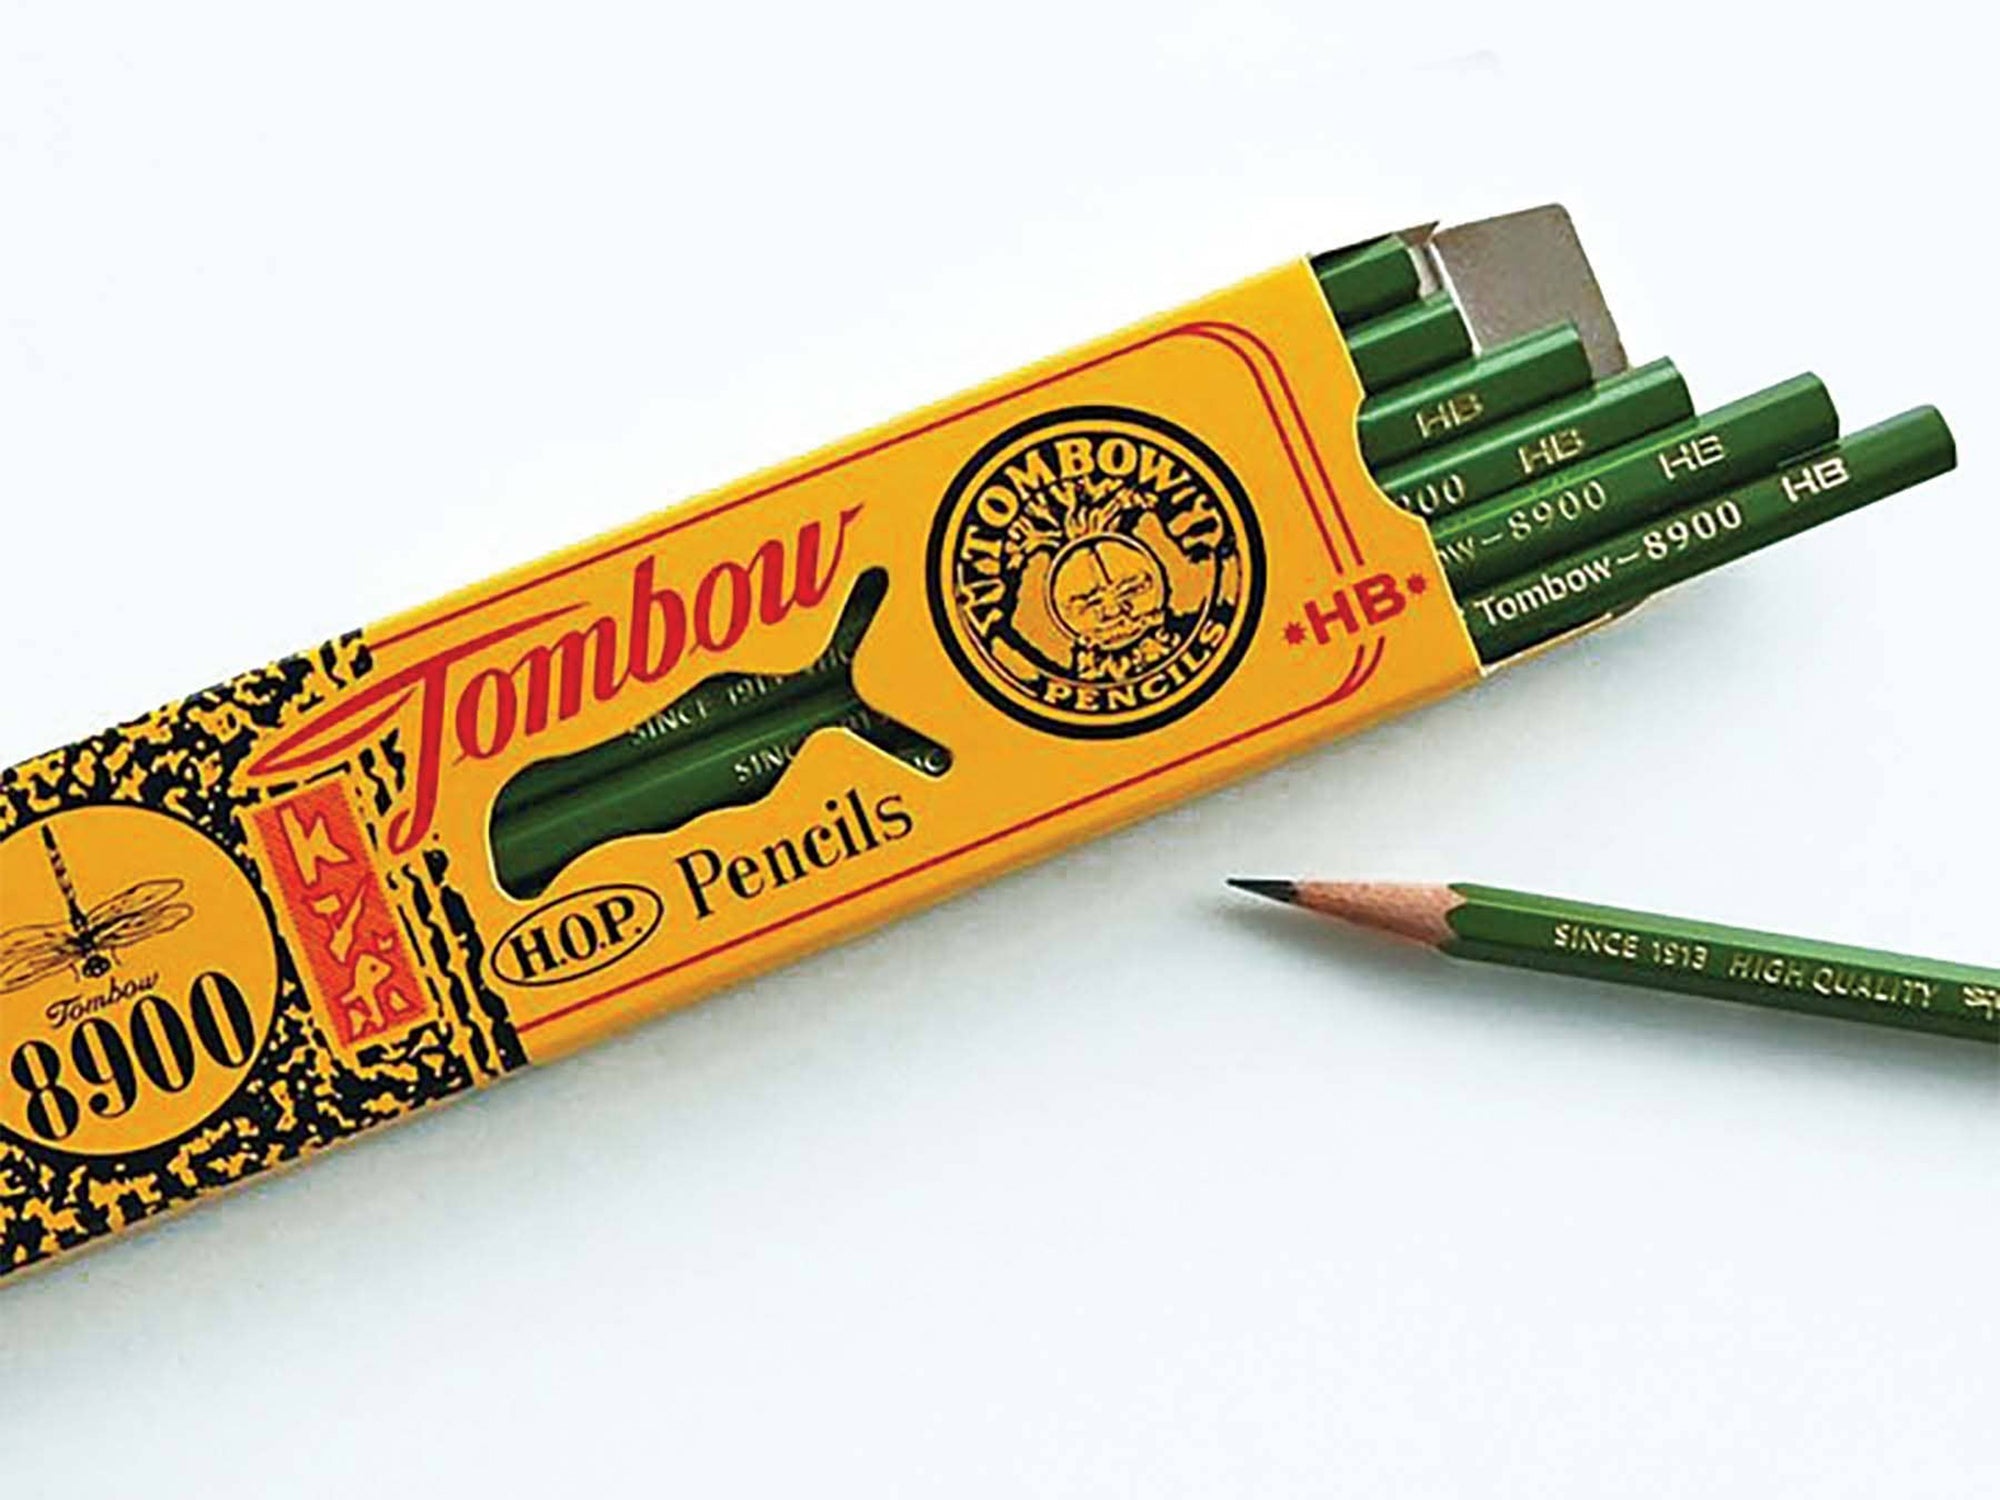 Tombow 8900 Drawing Pencils HB